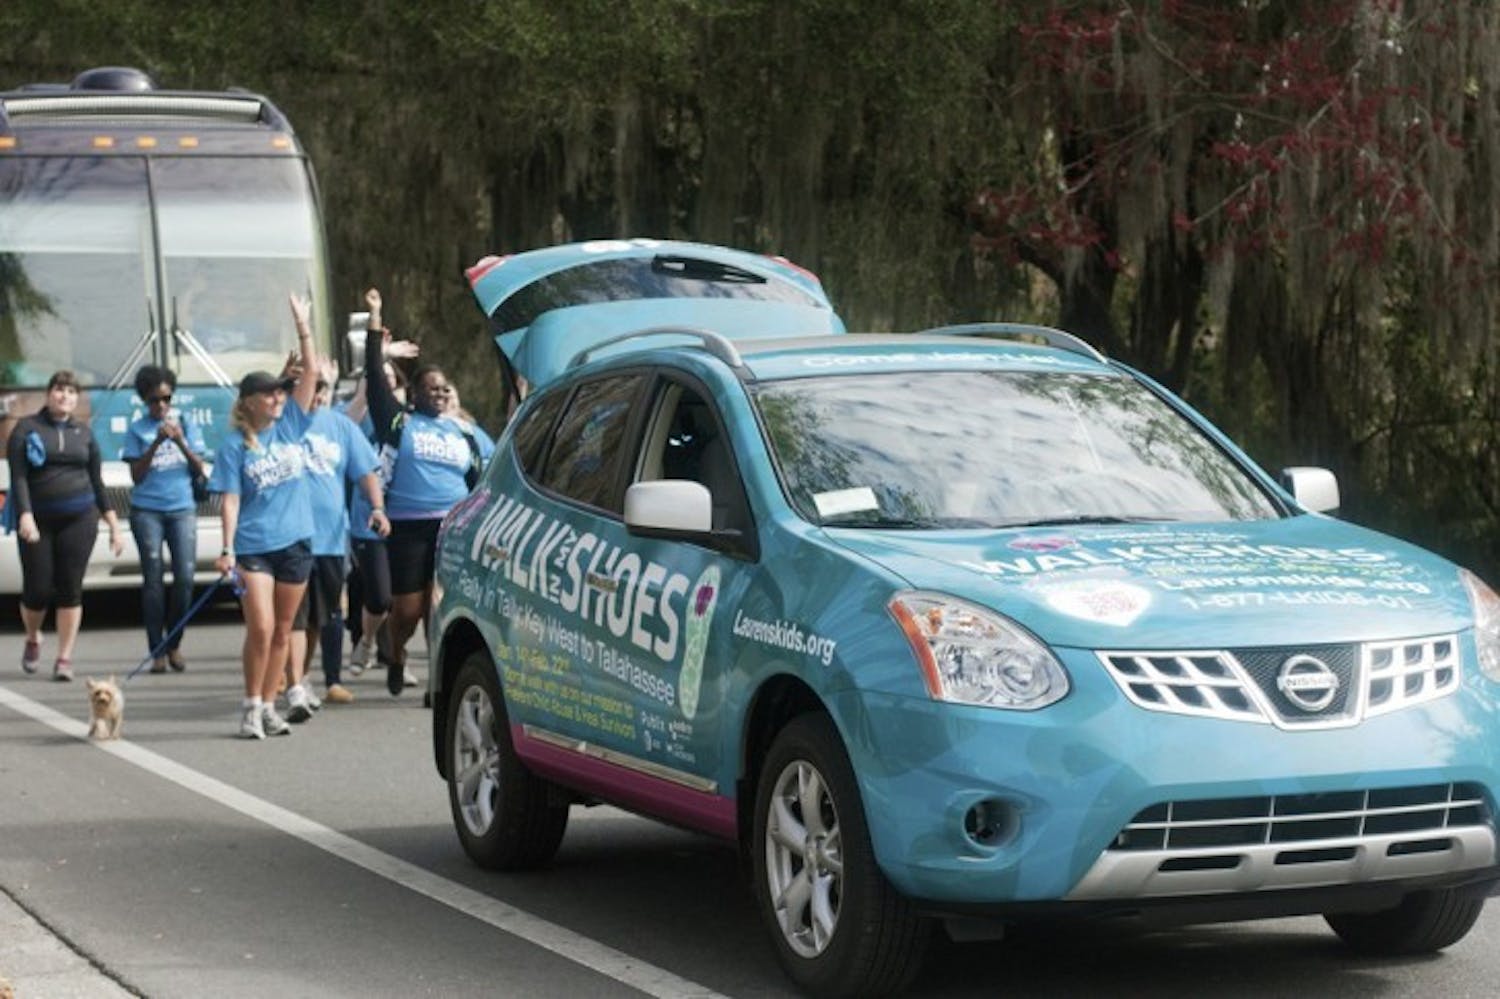 Lauren Book, founder of Lauren's Kids, and her supporters wave at passing motorists at they walk down Museum Drive near Lake Alice on Tuesday as part of the "Walk in My Shoes" campaign, which is a 1,500 mile walk across Florida to bring awareness to help prevent sexual abuse.